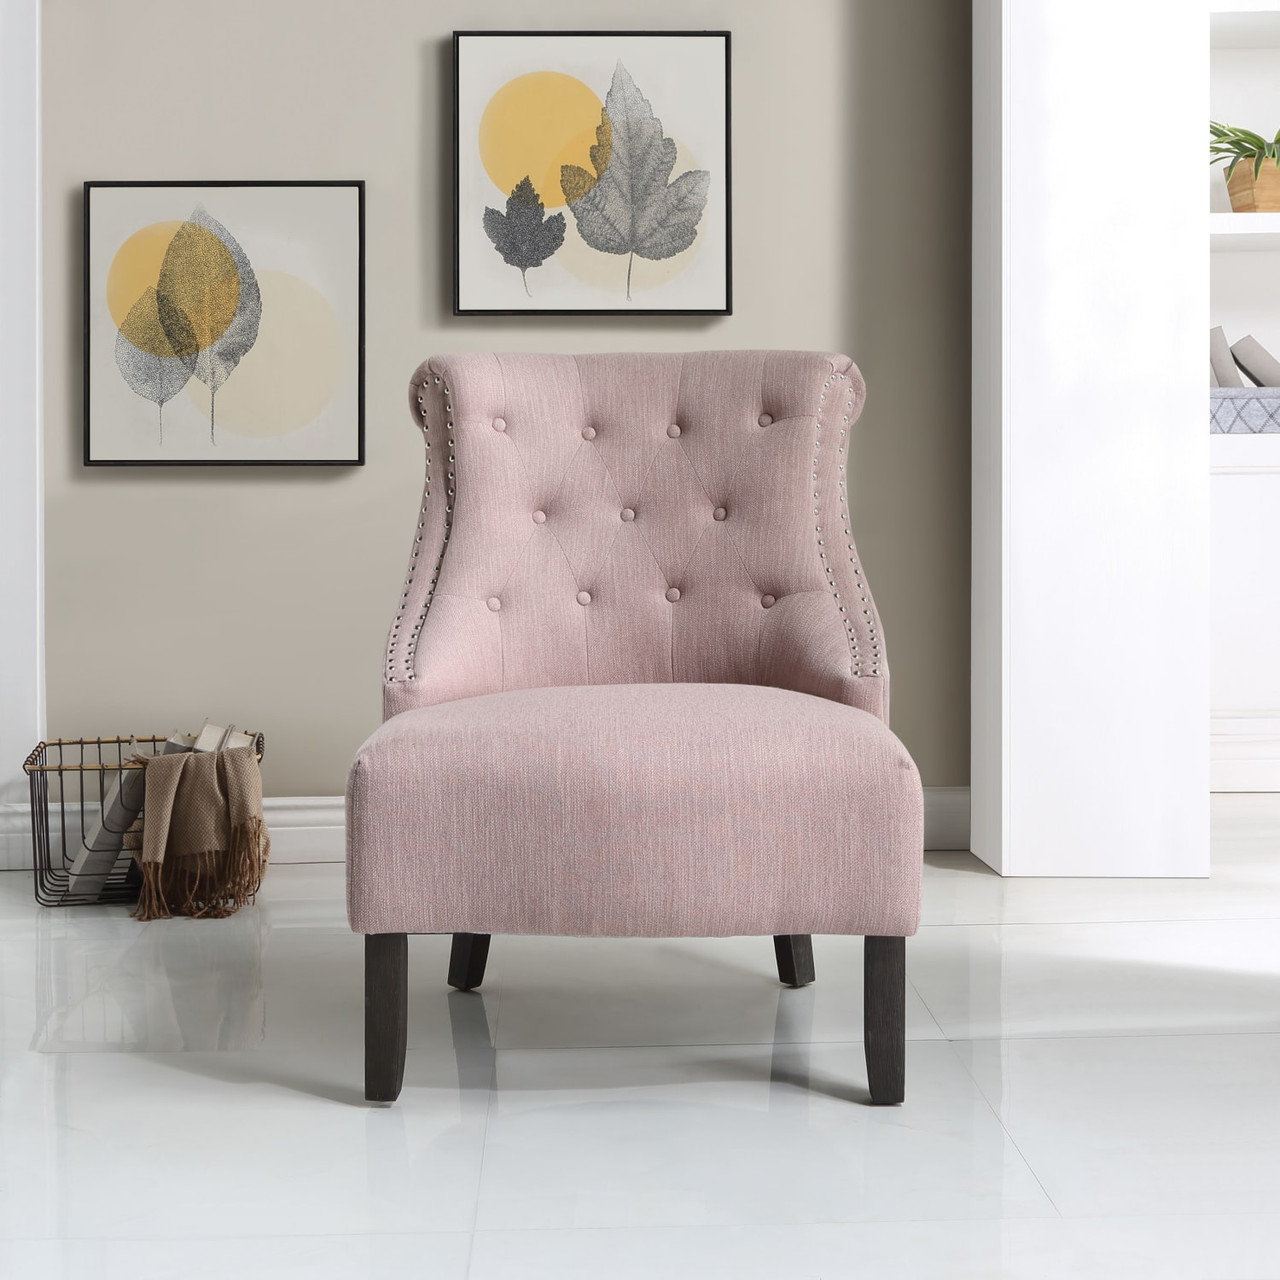 Evelyn Tufted Chair in Blush Fabric with Gray Wash Legs